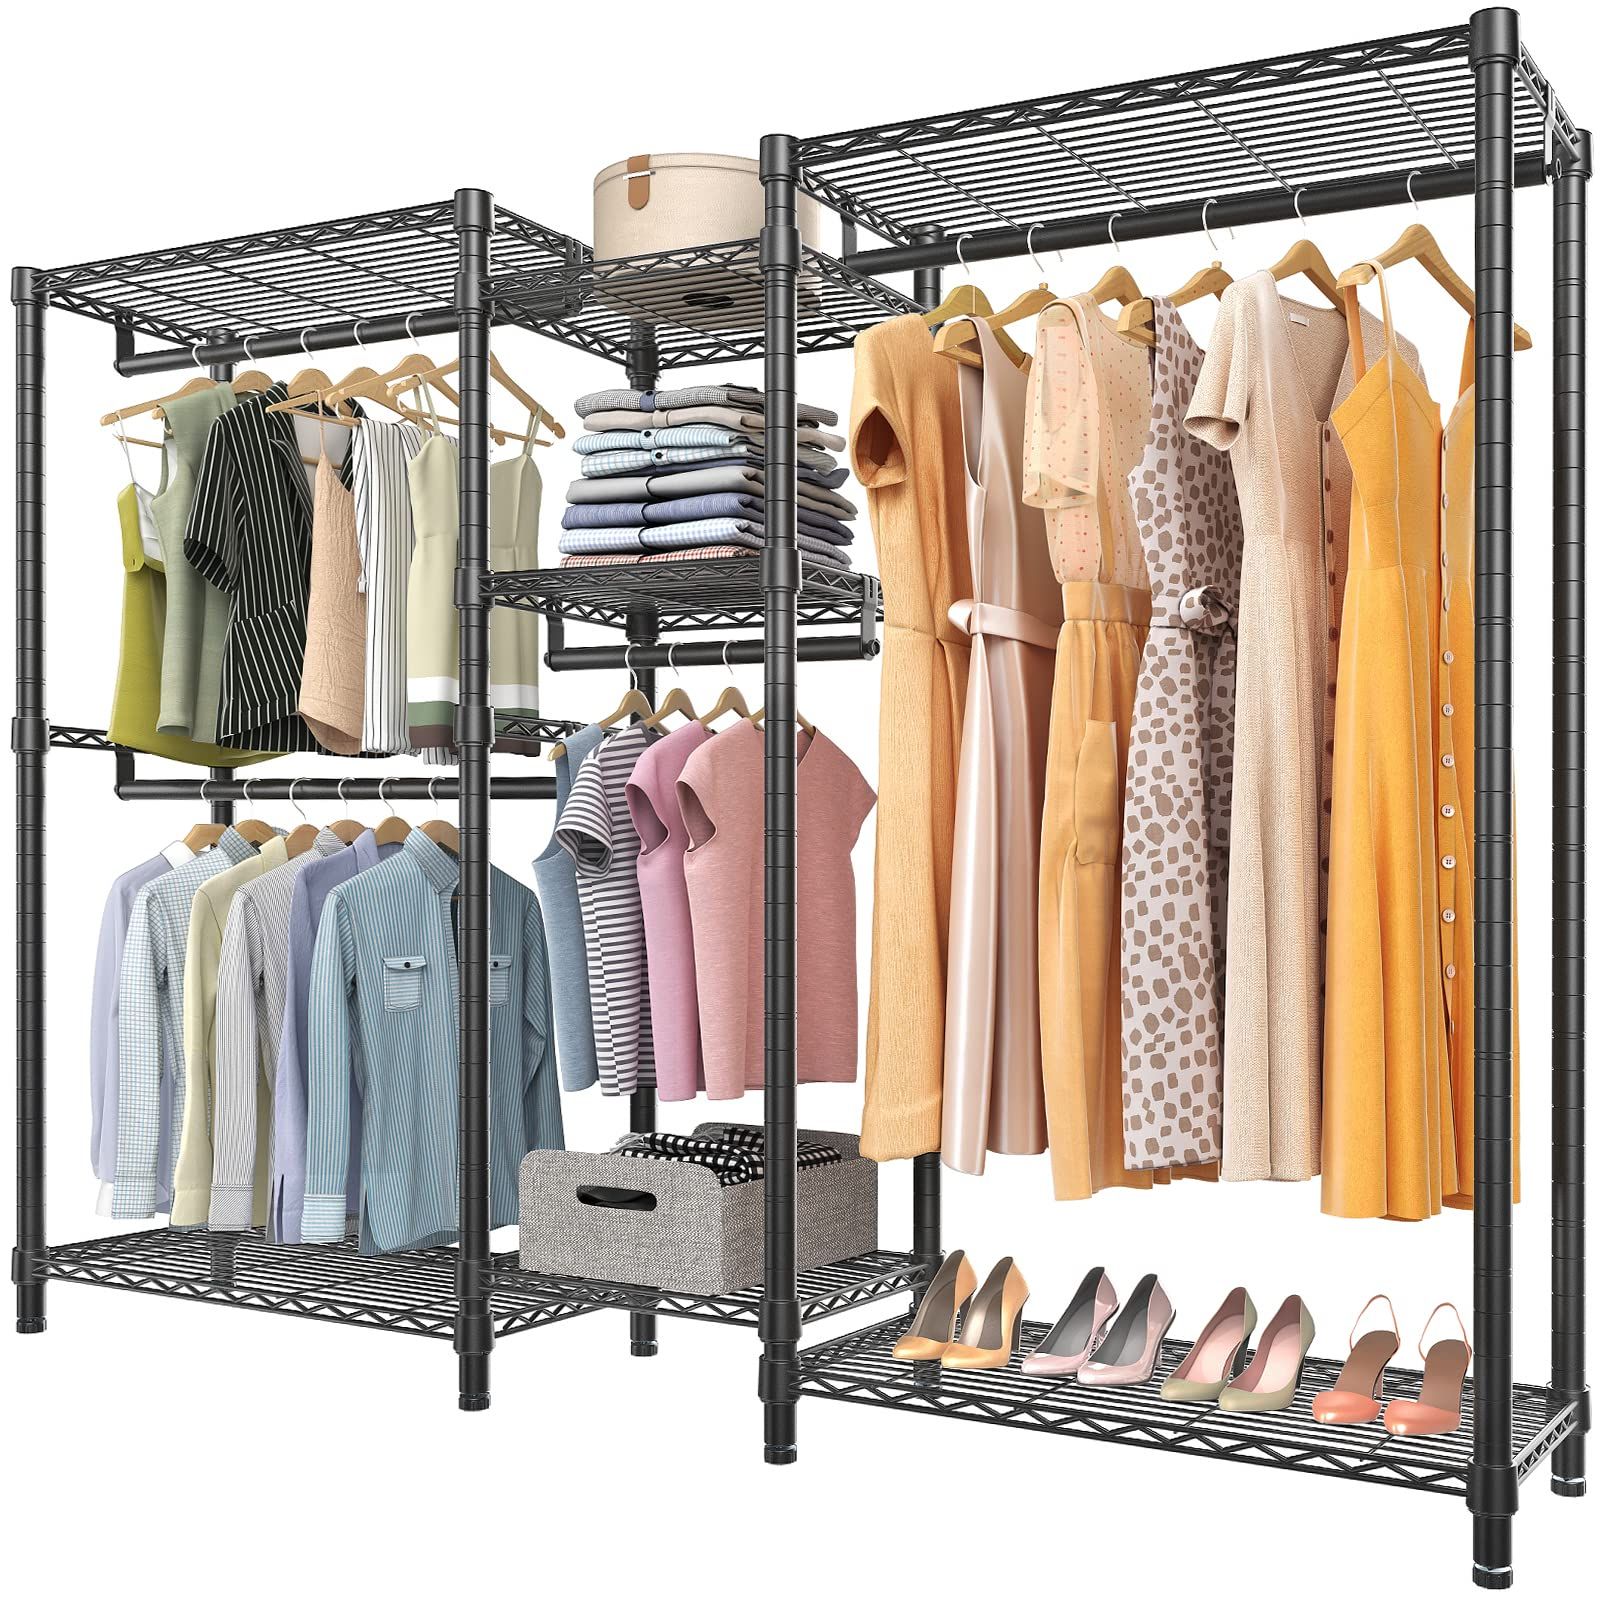 Current Amazon: Vipek V6 Wire Garment Rack Heavy Duty Clothes Rack Metal With  Shelves, Freestanding Portable Wardrobe Closet Rack For Hanging Clothes  74.4" L X 17.7" W X 76.8" H, Max Load 780lbs, Intended For Wire Garment Rack Wardrobes (Photo 2 of 10)